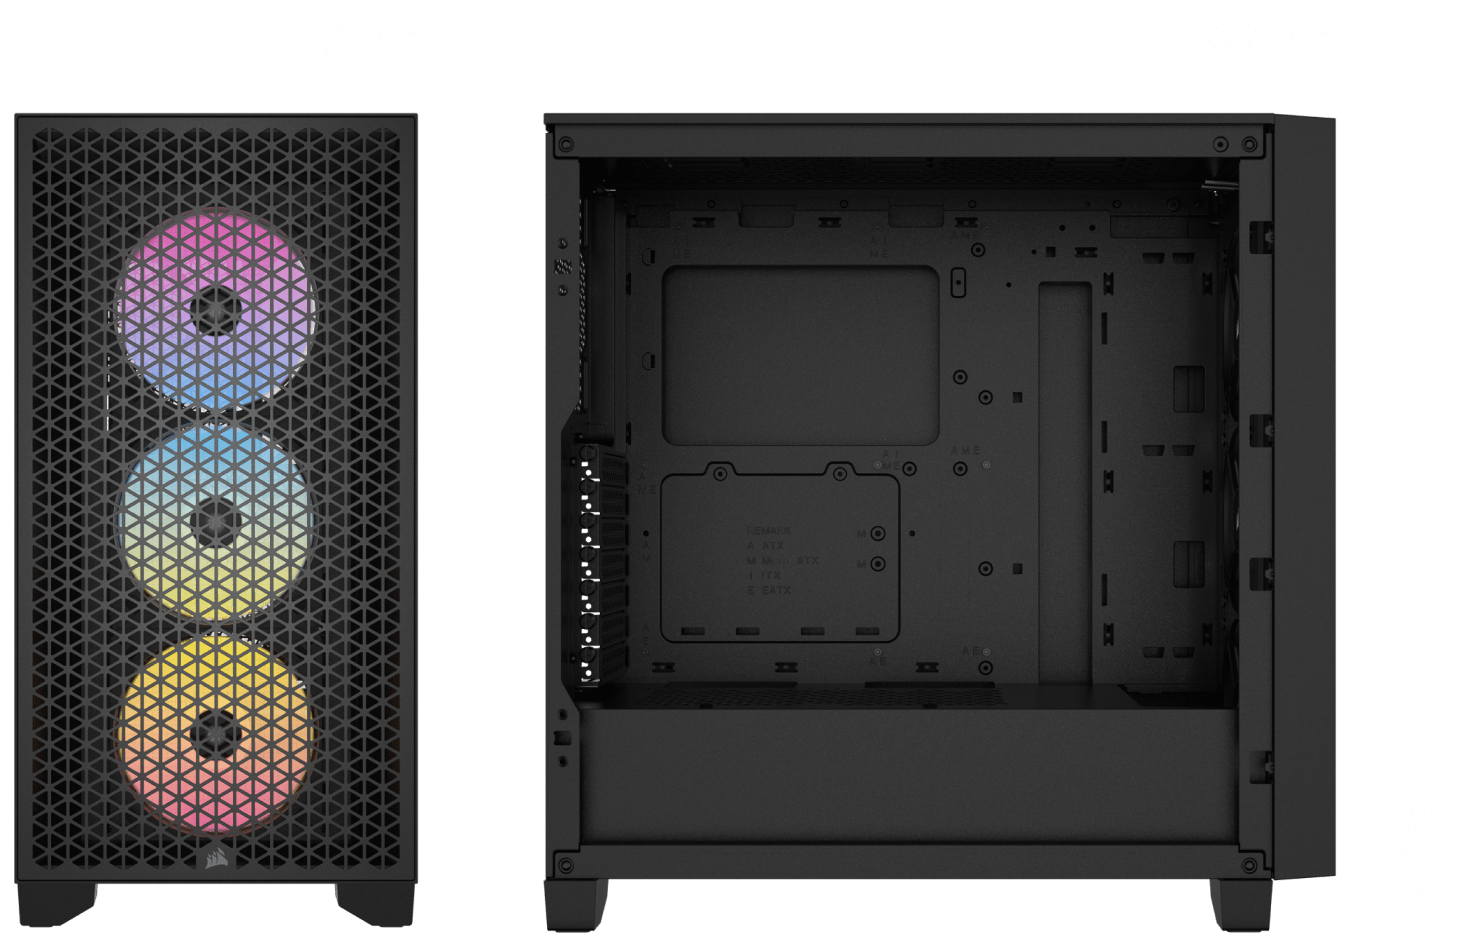 Head-on view of empty 3000D RGB AIRFLOW PC case showing fan capacity.